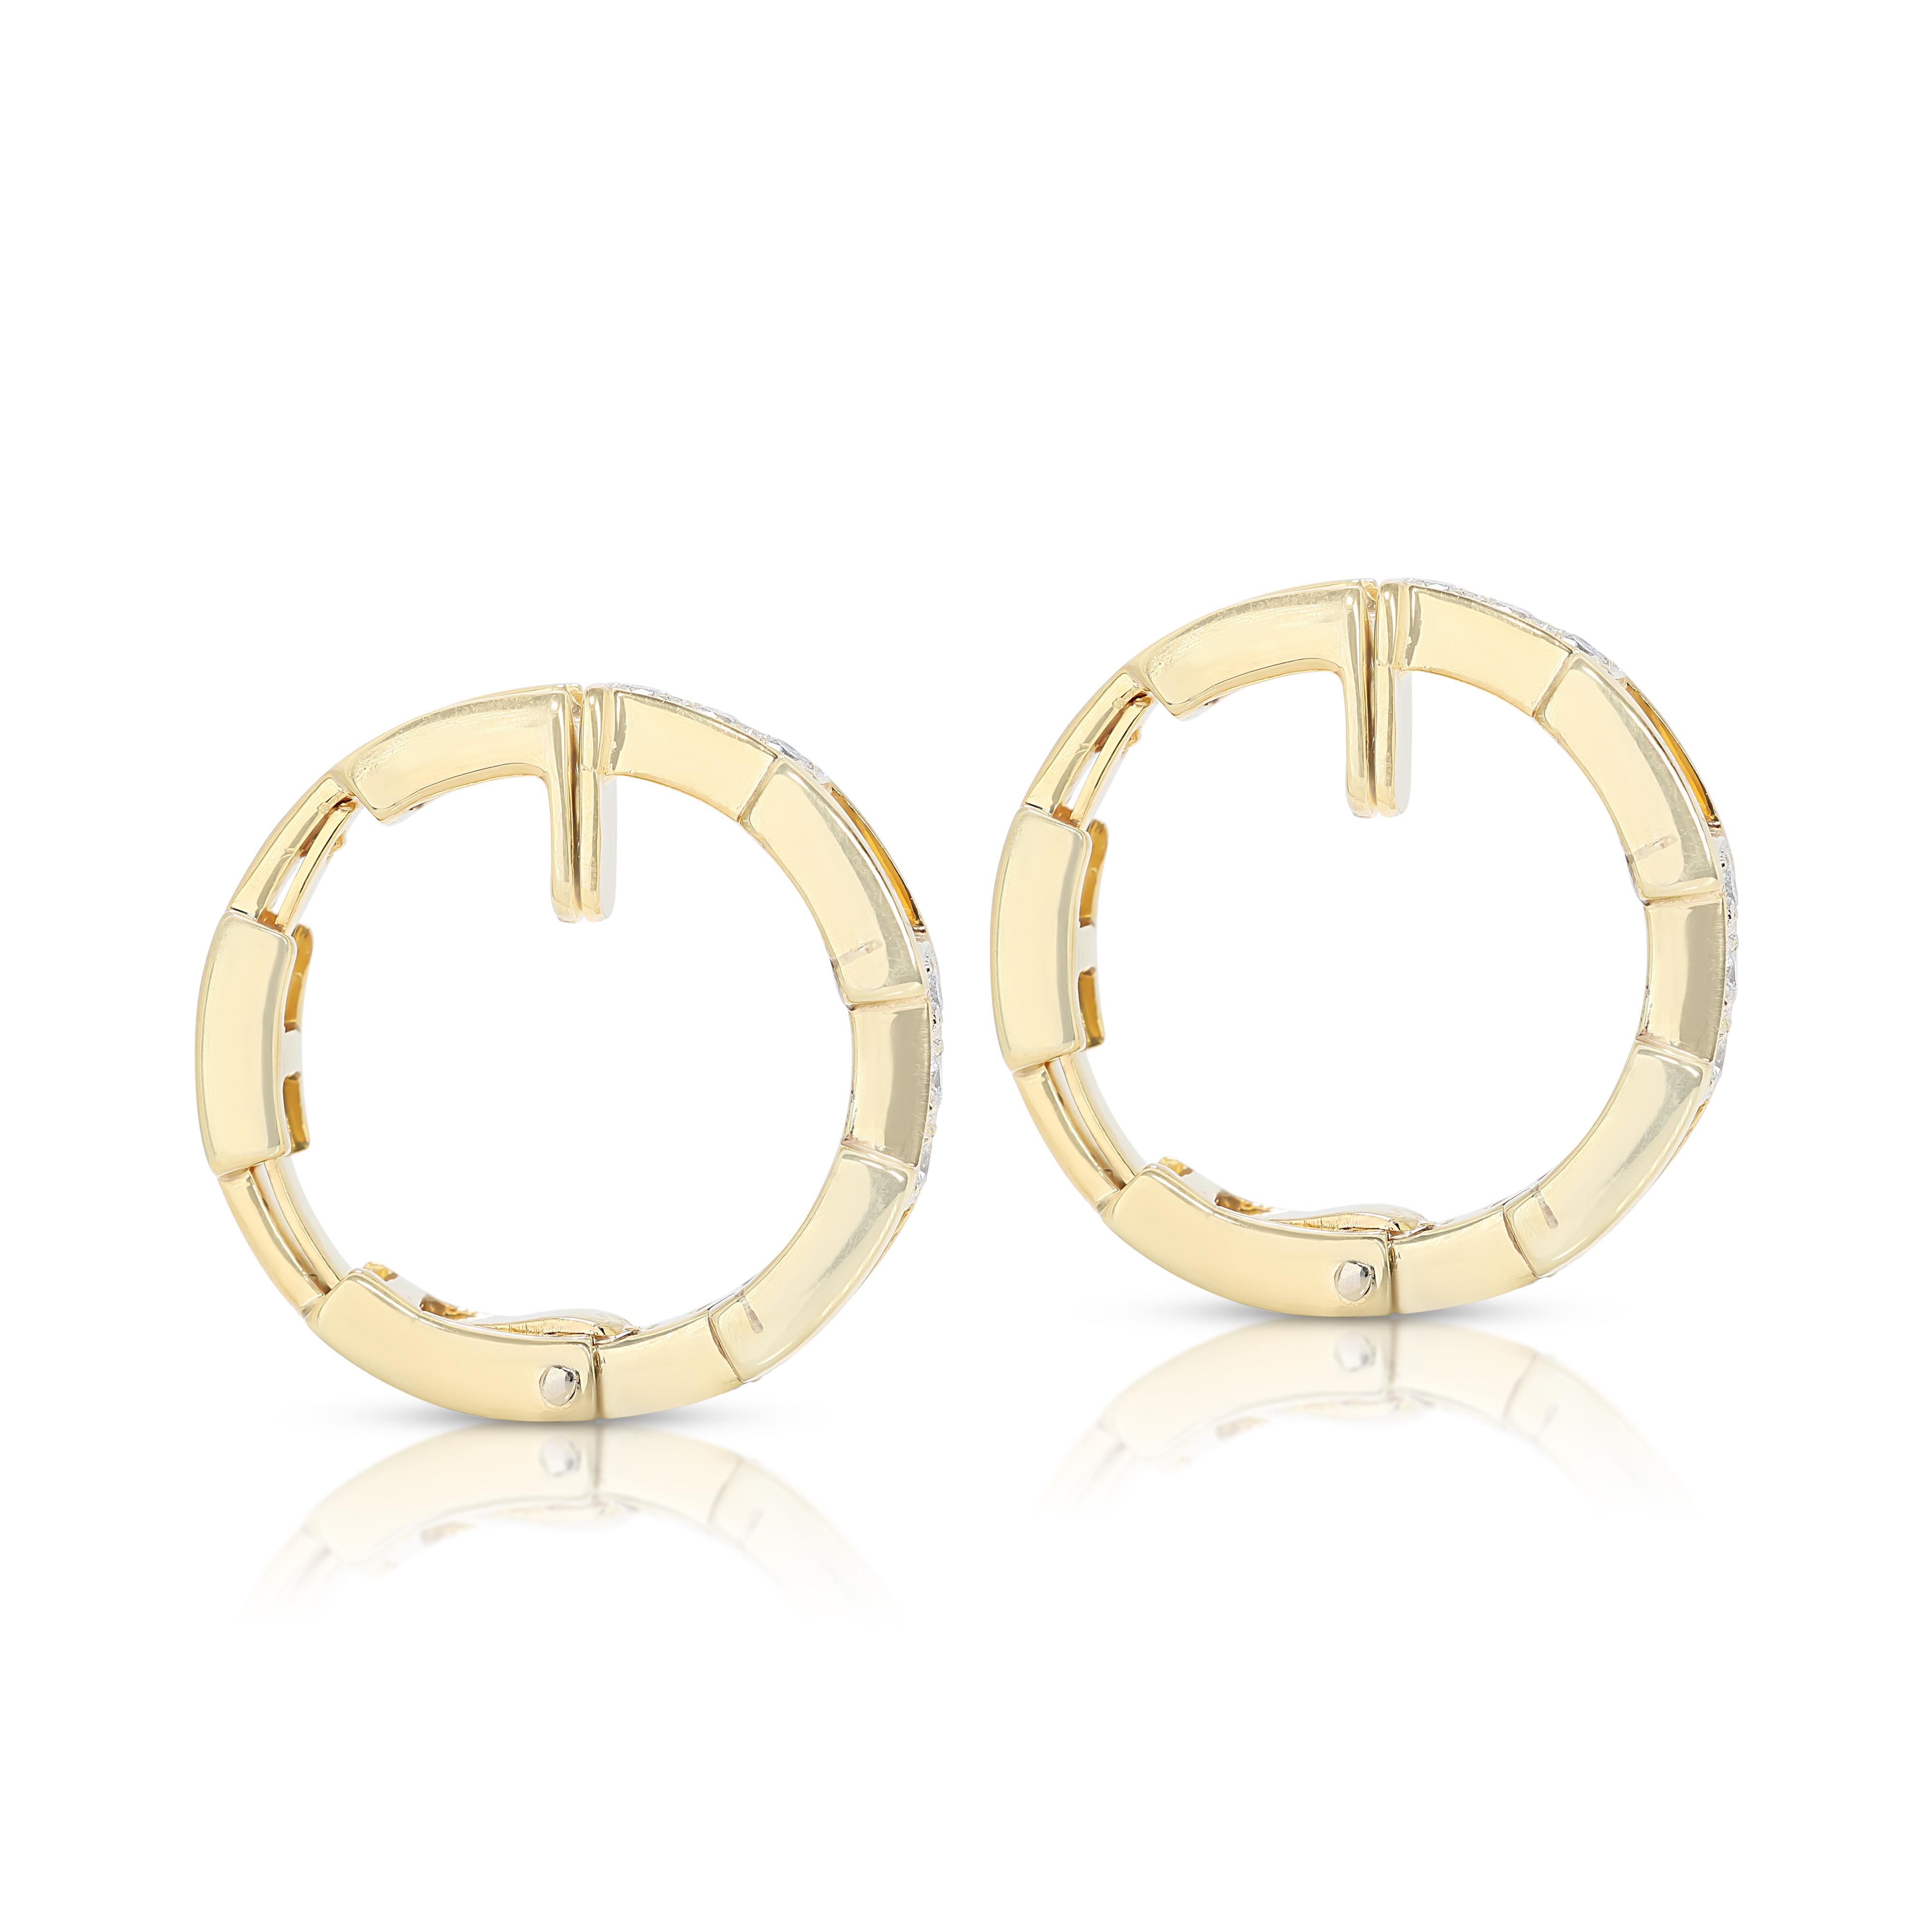 Captivating 0.30ct Diamonds Earrings in 14K Yellow Gold For Sale 1